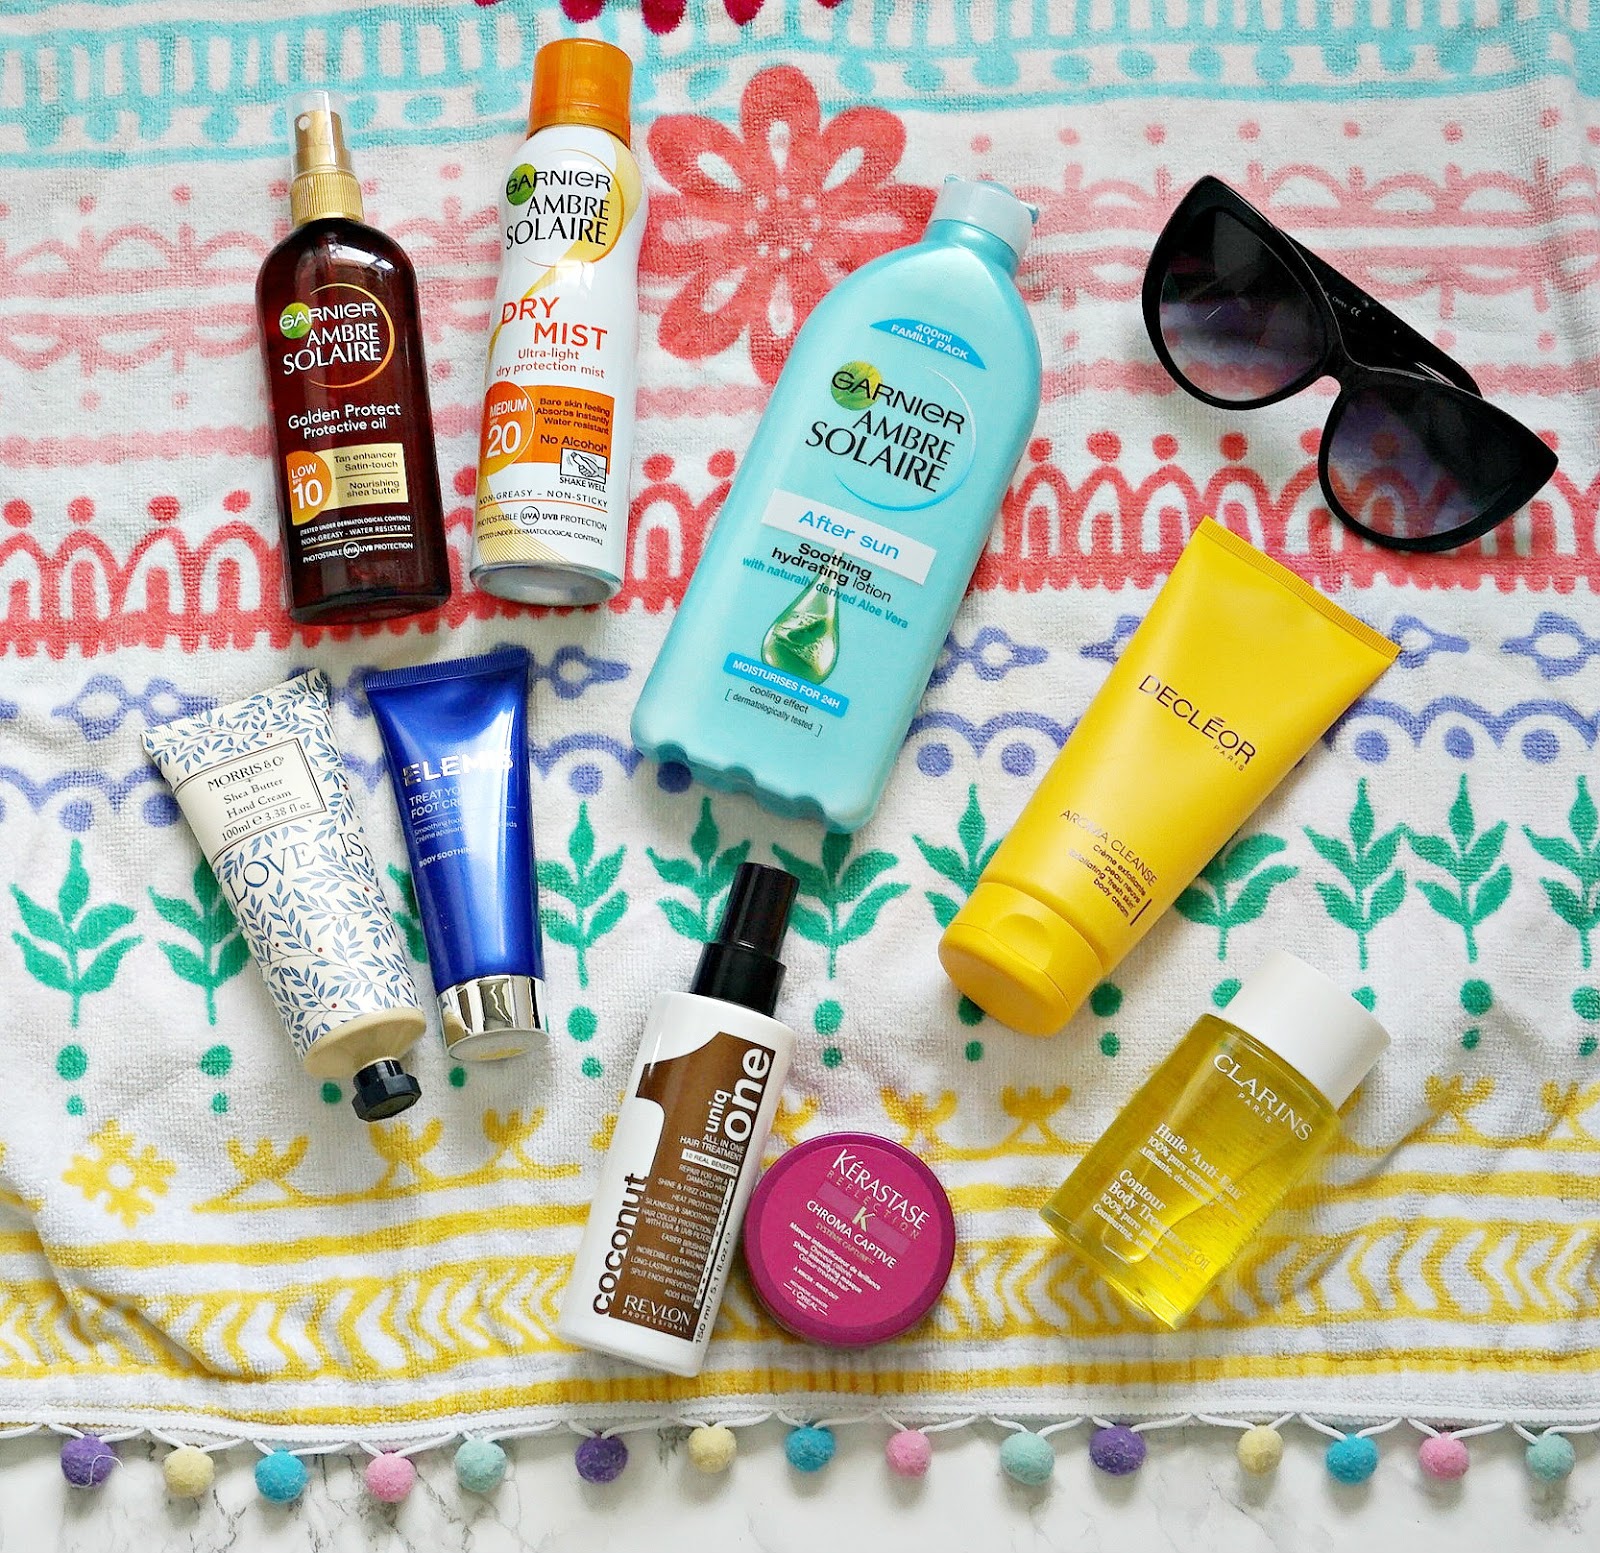 Ambre Solaire SPF, Elemis Foot Cream, Kérastase Chroma Captive Hair Mask, Uniq One 10 in 1 Hair Treatment, Clarins Contour Body Oil, Ambre Solaire Aftersun, Decleor Aroma Cleanse, Review, Sun holiday essentials, Fragrance Direct